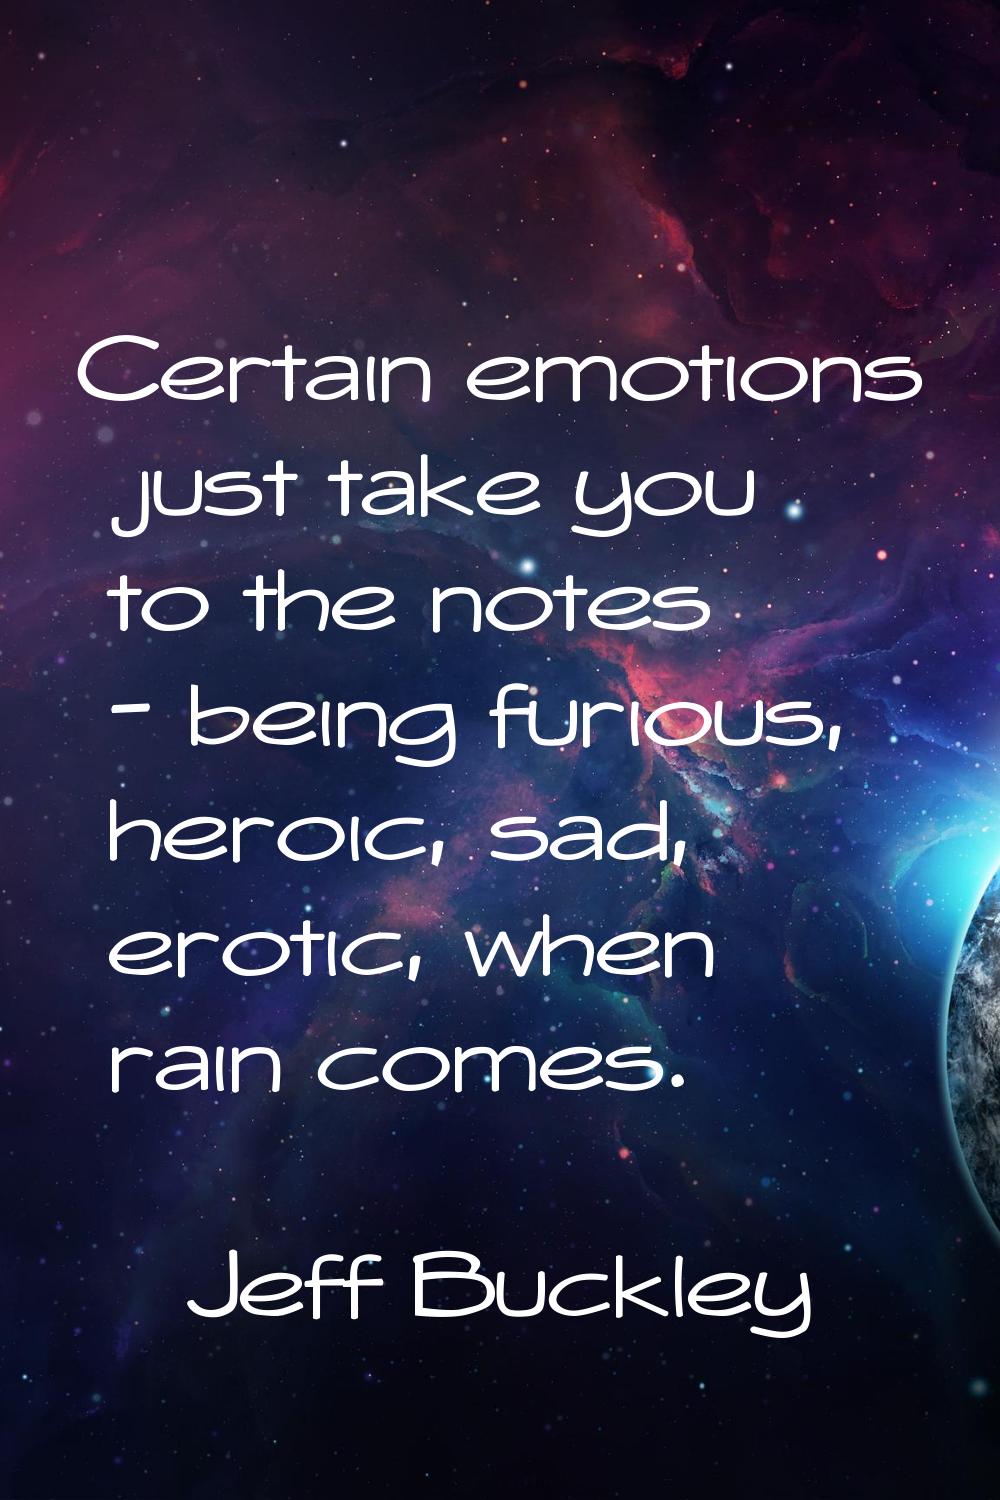 Certain emotions just take you to the notes - being furious, heroic, sad, erotic, when rain comes.